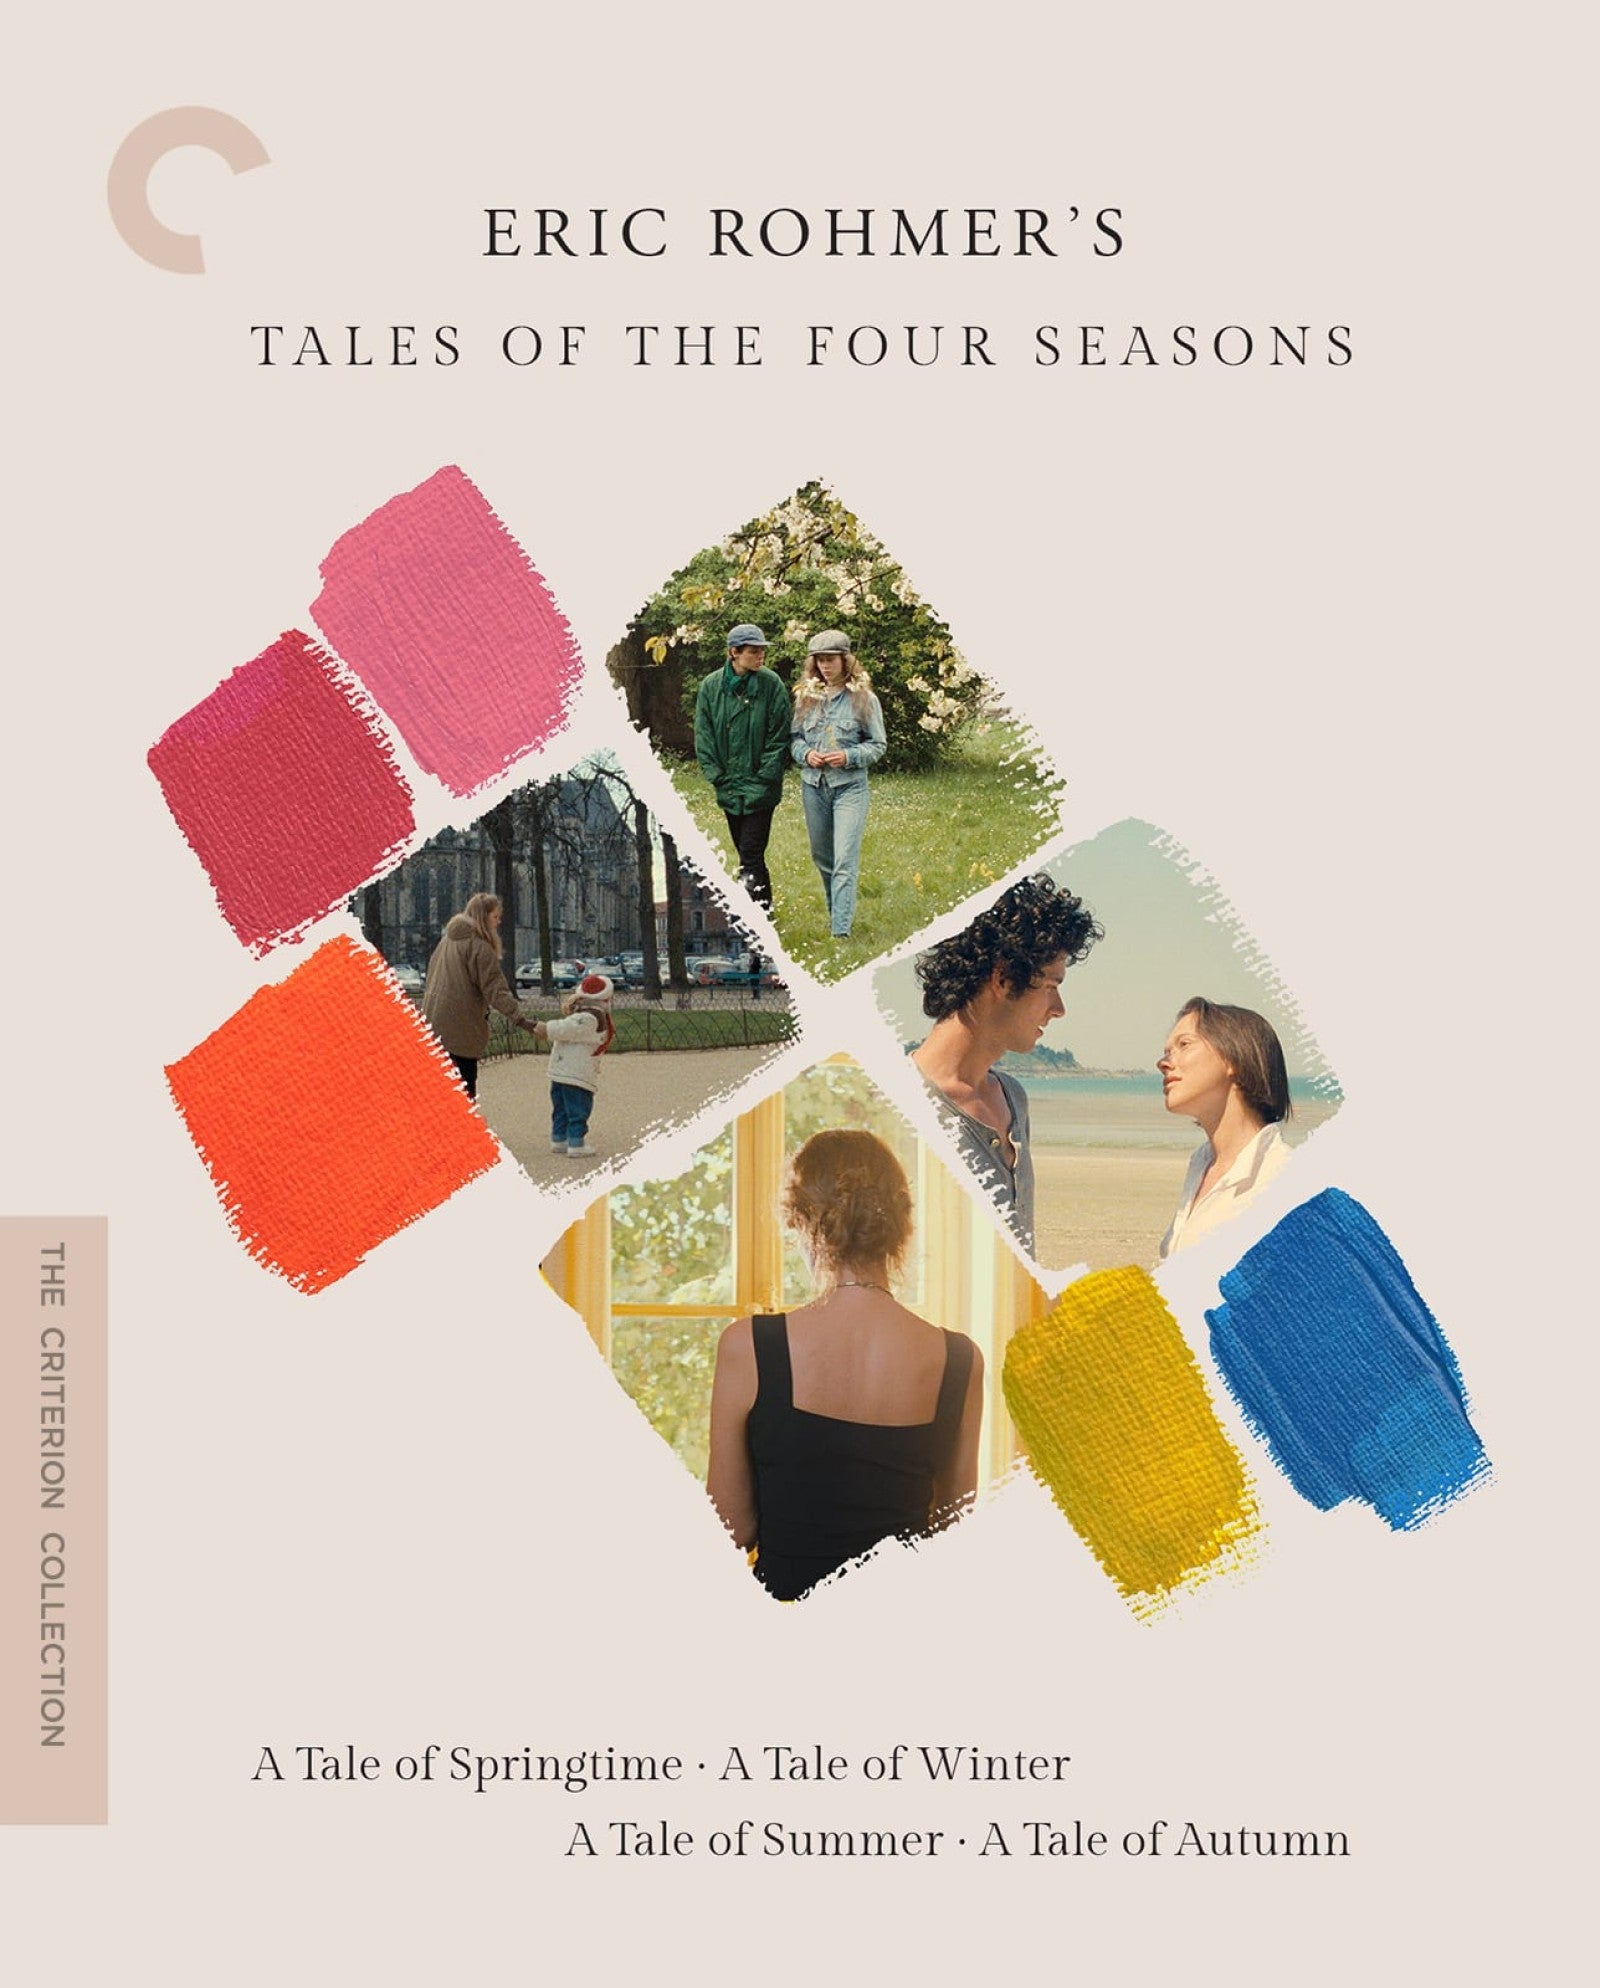 ERIC ROHMER'S TALES OF THE FOUR SEASON BLU-RAY